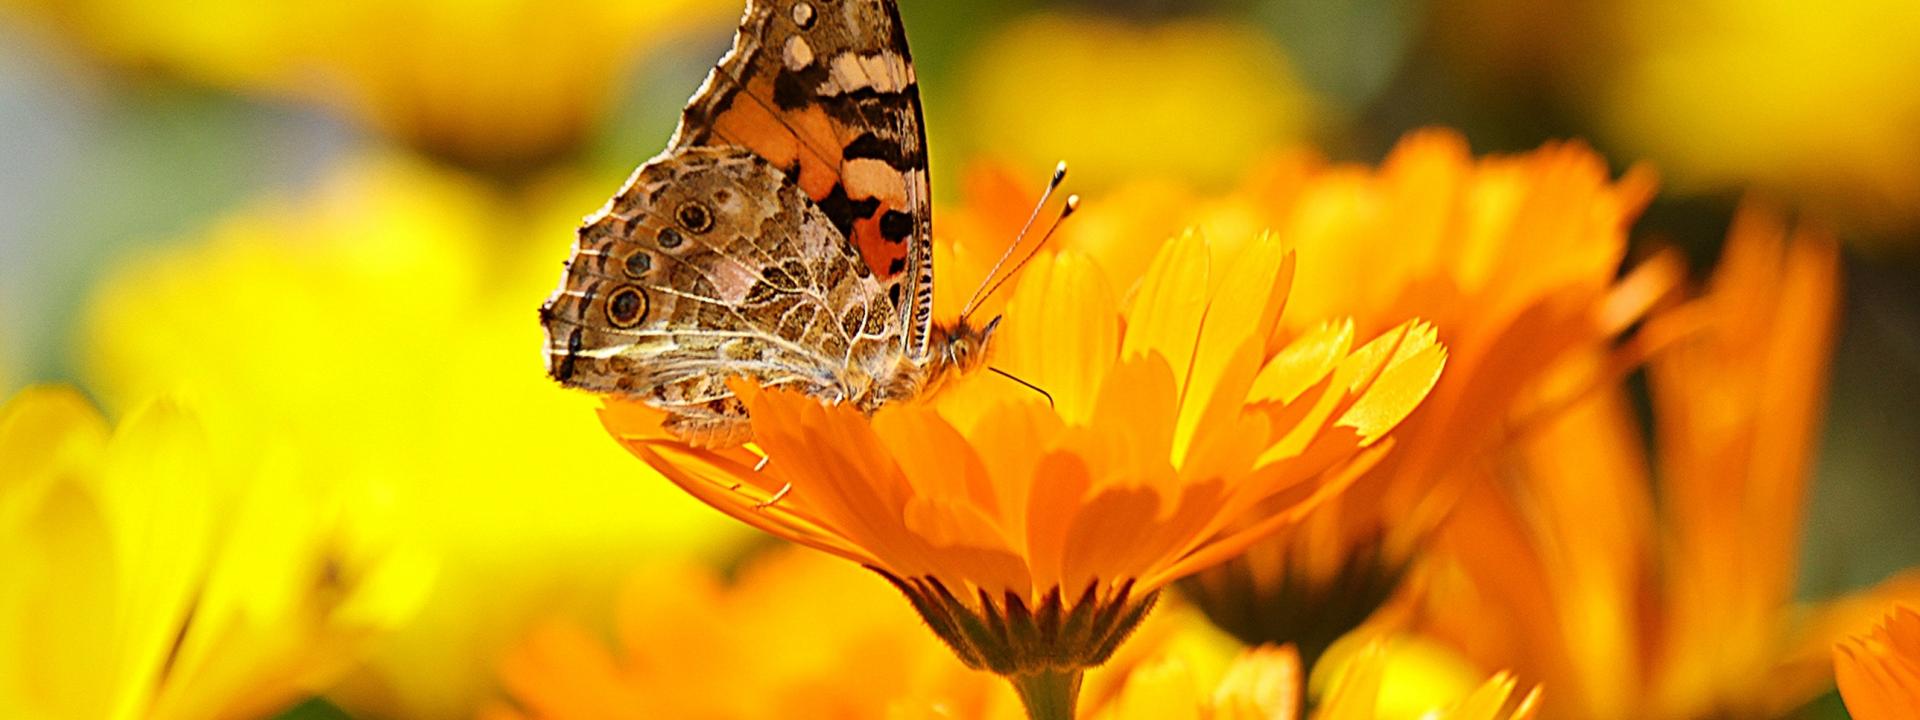 A butterfly perched on a yellow flower in a field of golden yellow flowers